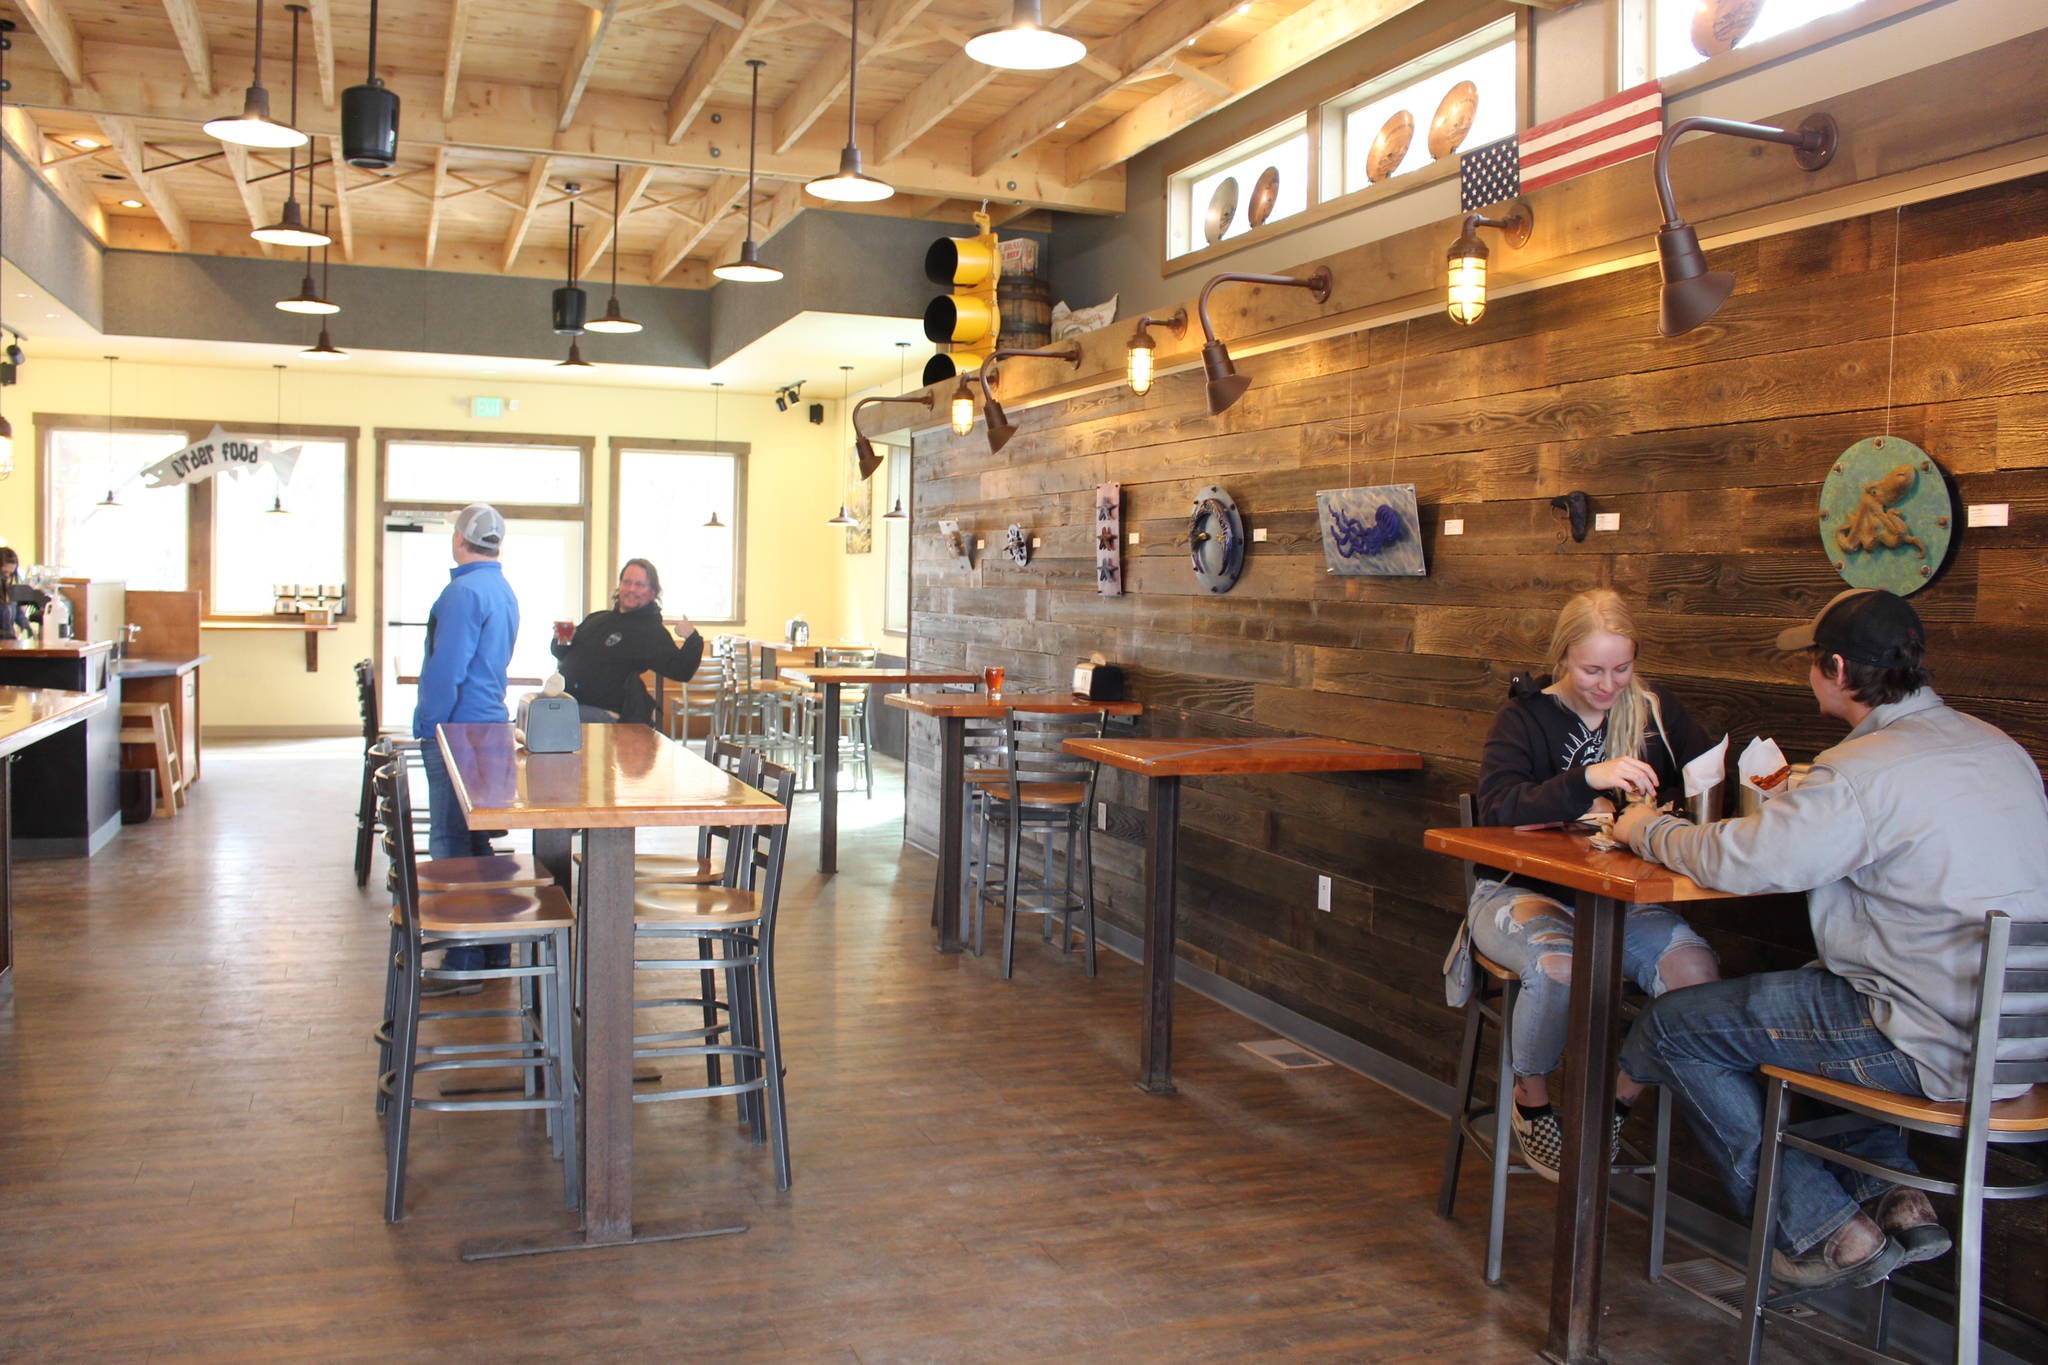 Kenai Peninsula residents eat inside Kenai River Brewing Company in Soldotna, Alaska on May 8, 2020. Friday was the first day that restaurants around the state began opening for dine-in services without the need for a reservation. (Photo by Brian Mazurek/Peninsula Clarion)